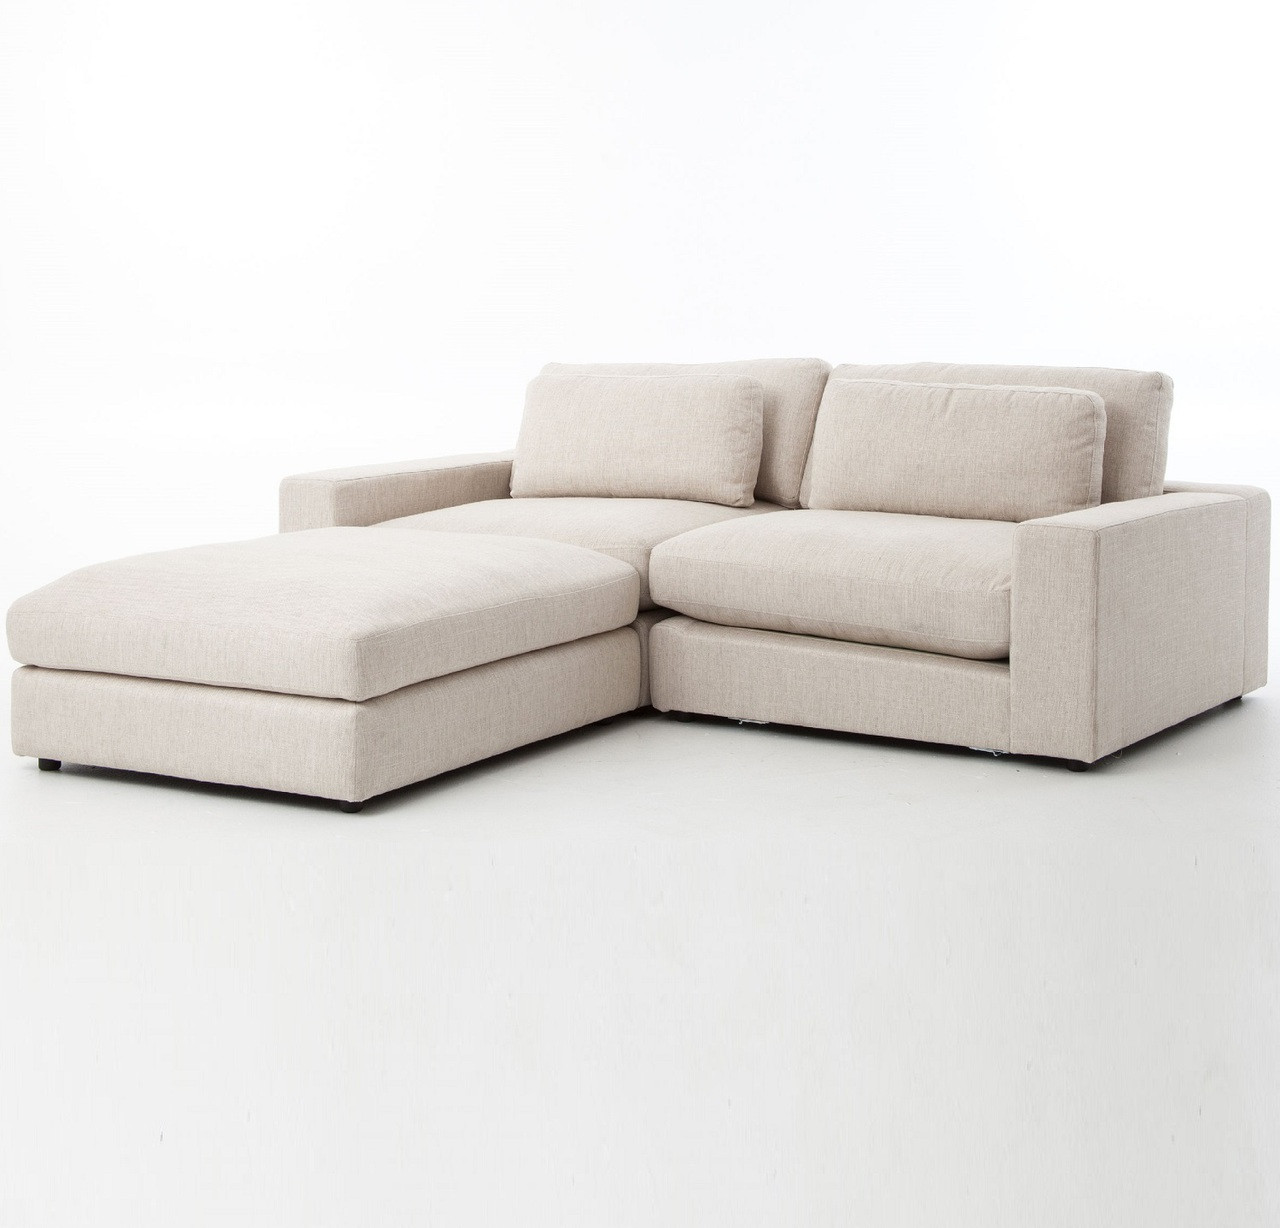 Bloor Beige Contemporary 3 Piece Small Sectional Sofa